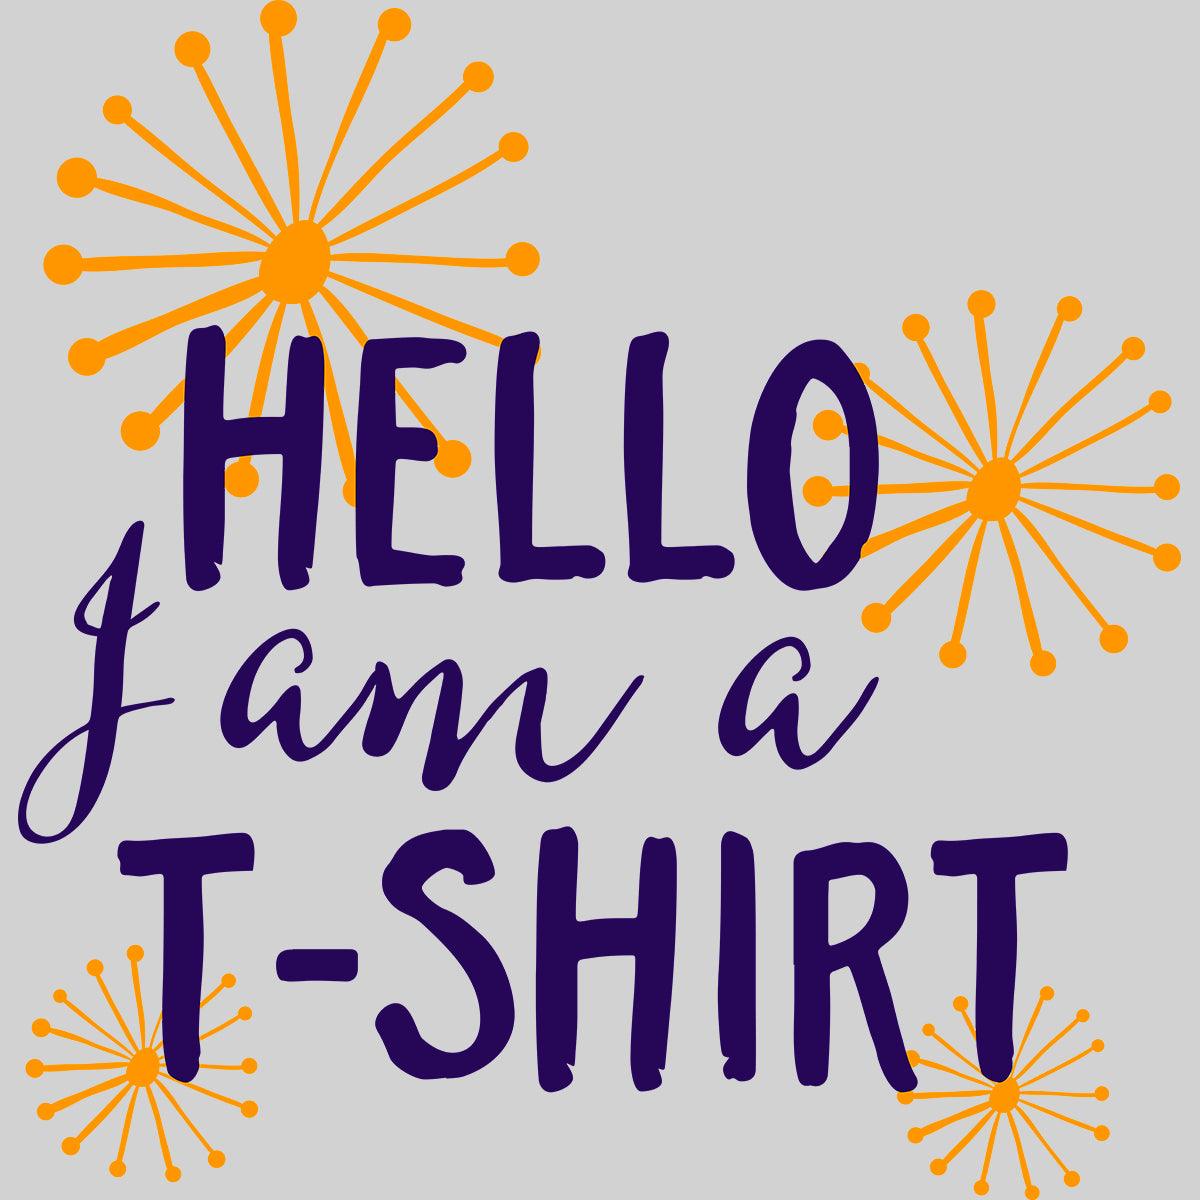 Hello I am A T-Shirt Typography Collection - Kuzi Tees